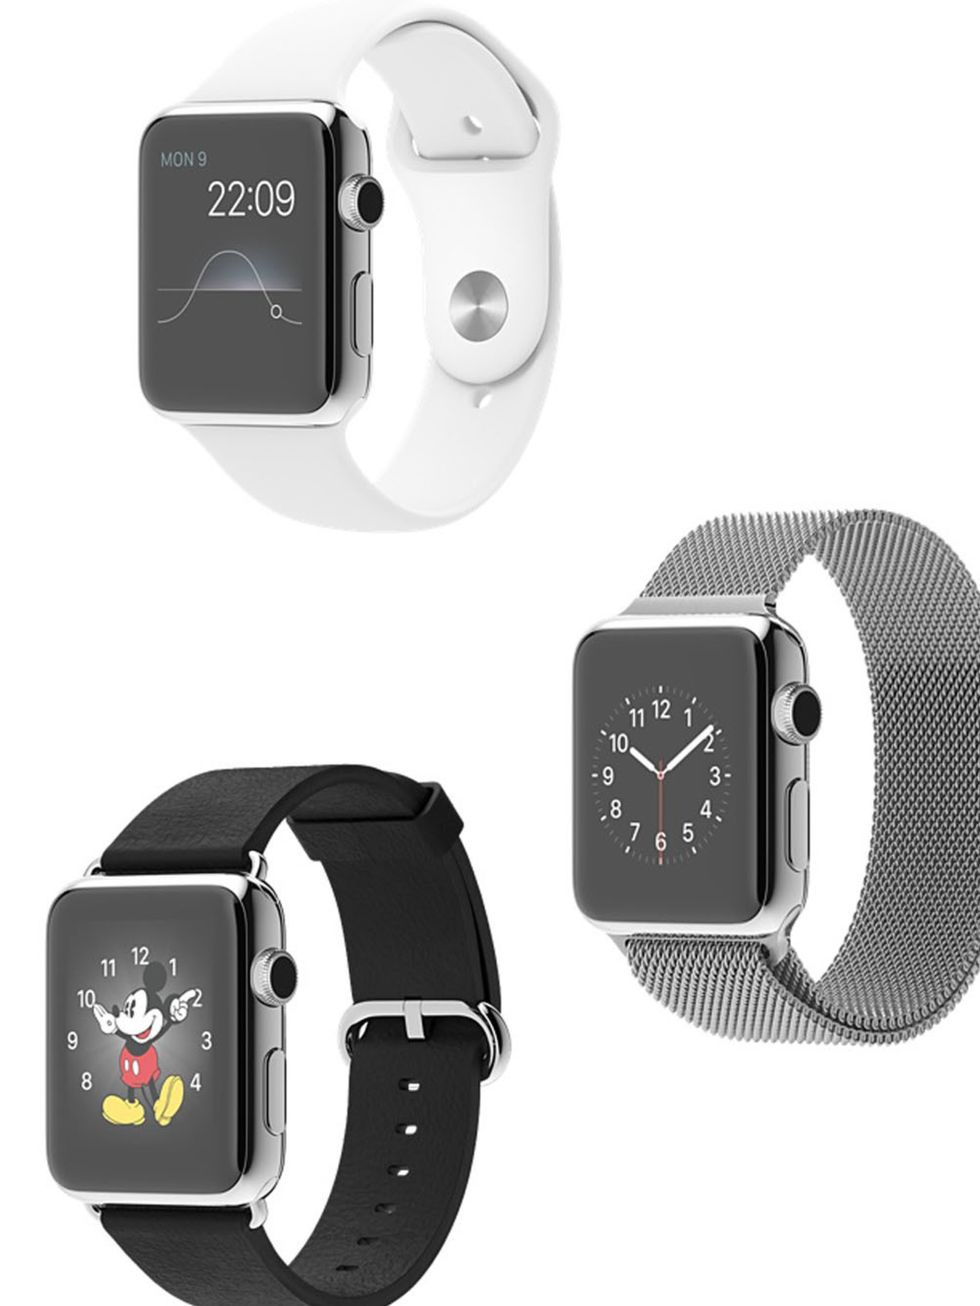 Electronic device, Product, Gadget, Technology, White, Font, Rectangle, Watch, Black, Grey, 